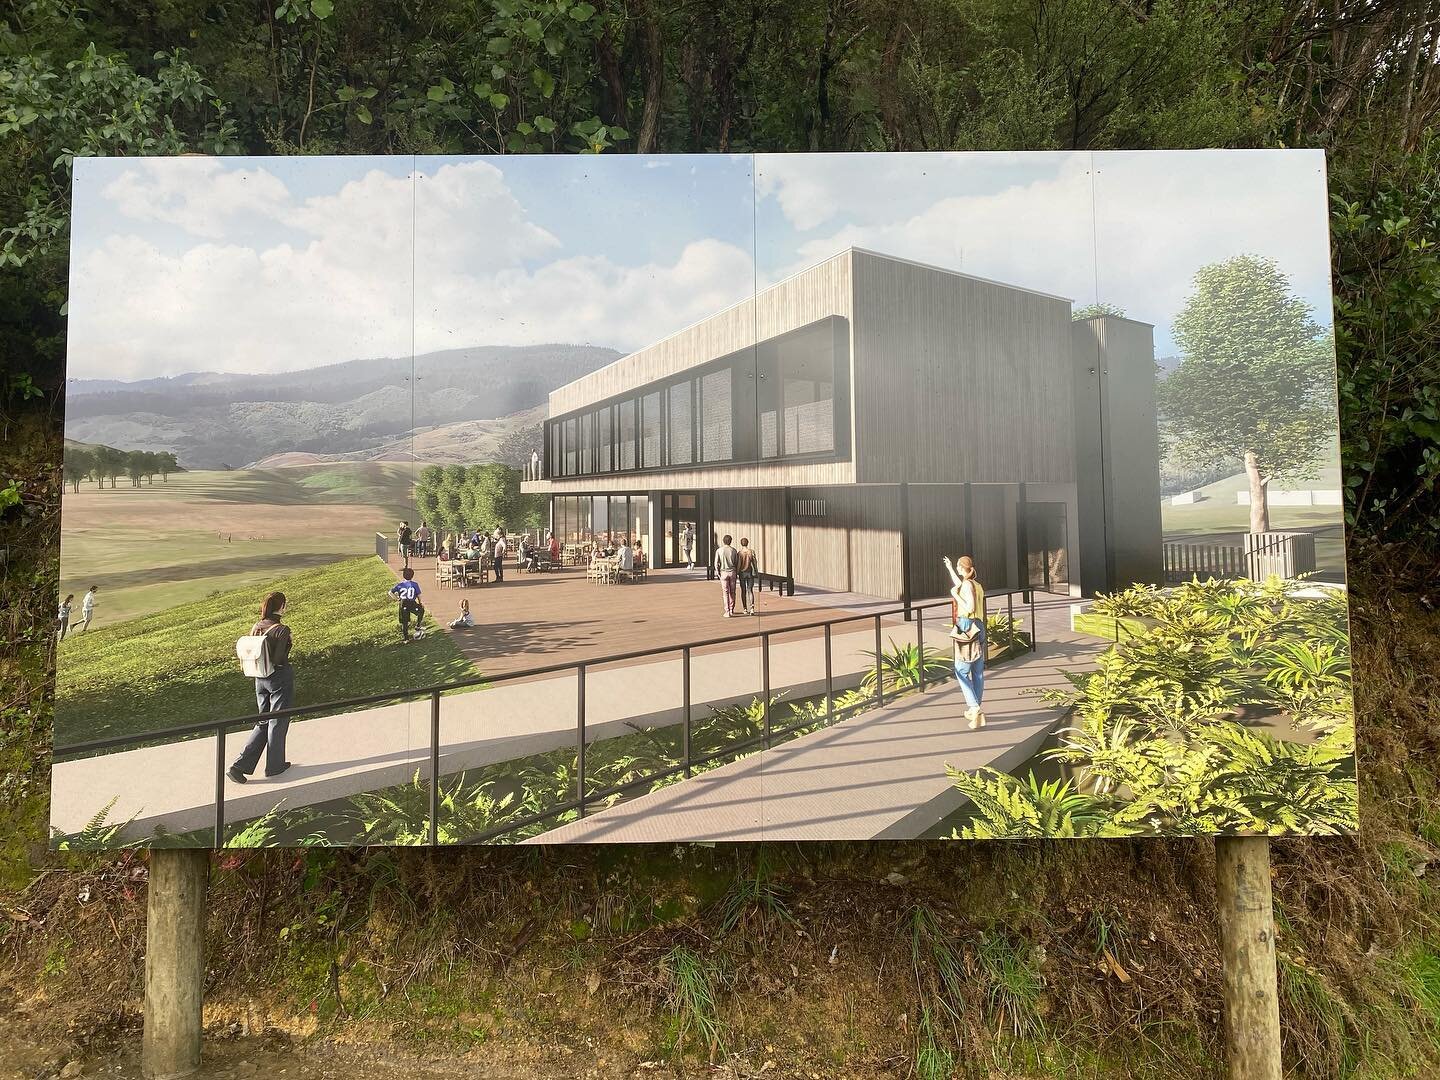 Exciting things coming at The Morgan&rsquo;s Golf Club. New project well underway. 
#cafe #bespoke #architecture #wellington #planitconstruction #planit #craftsmen #building